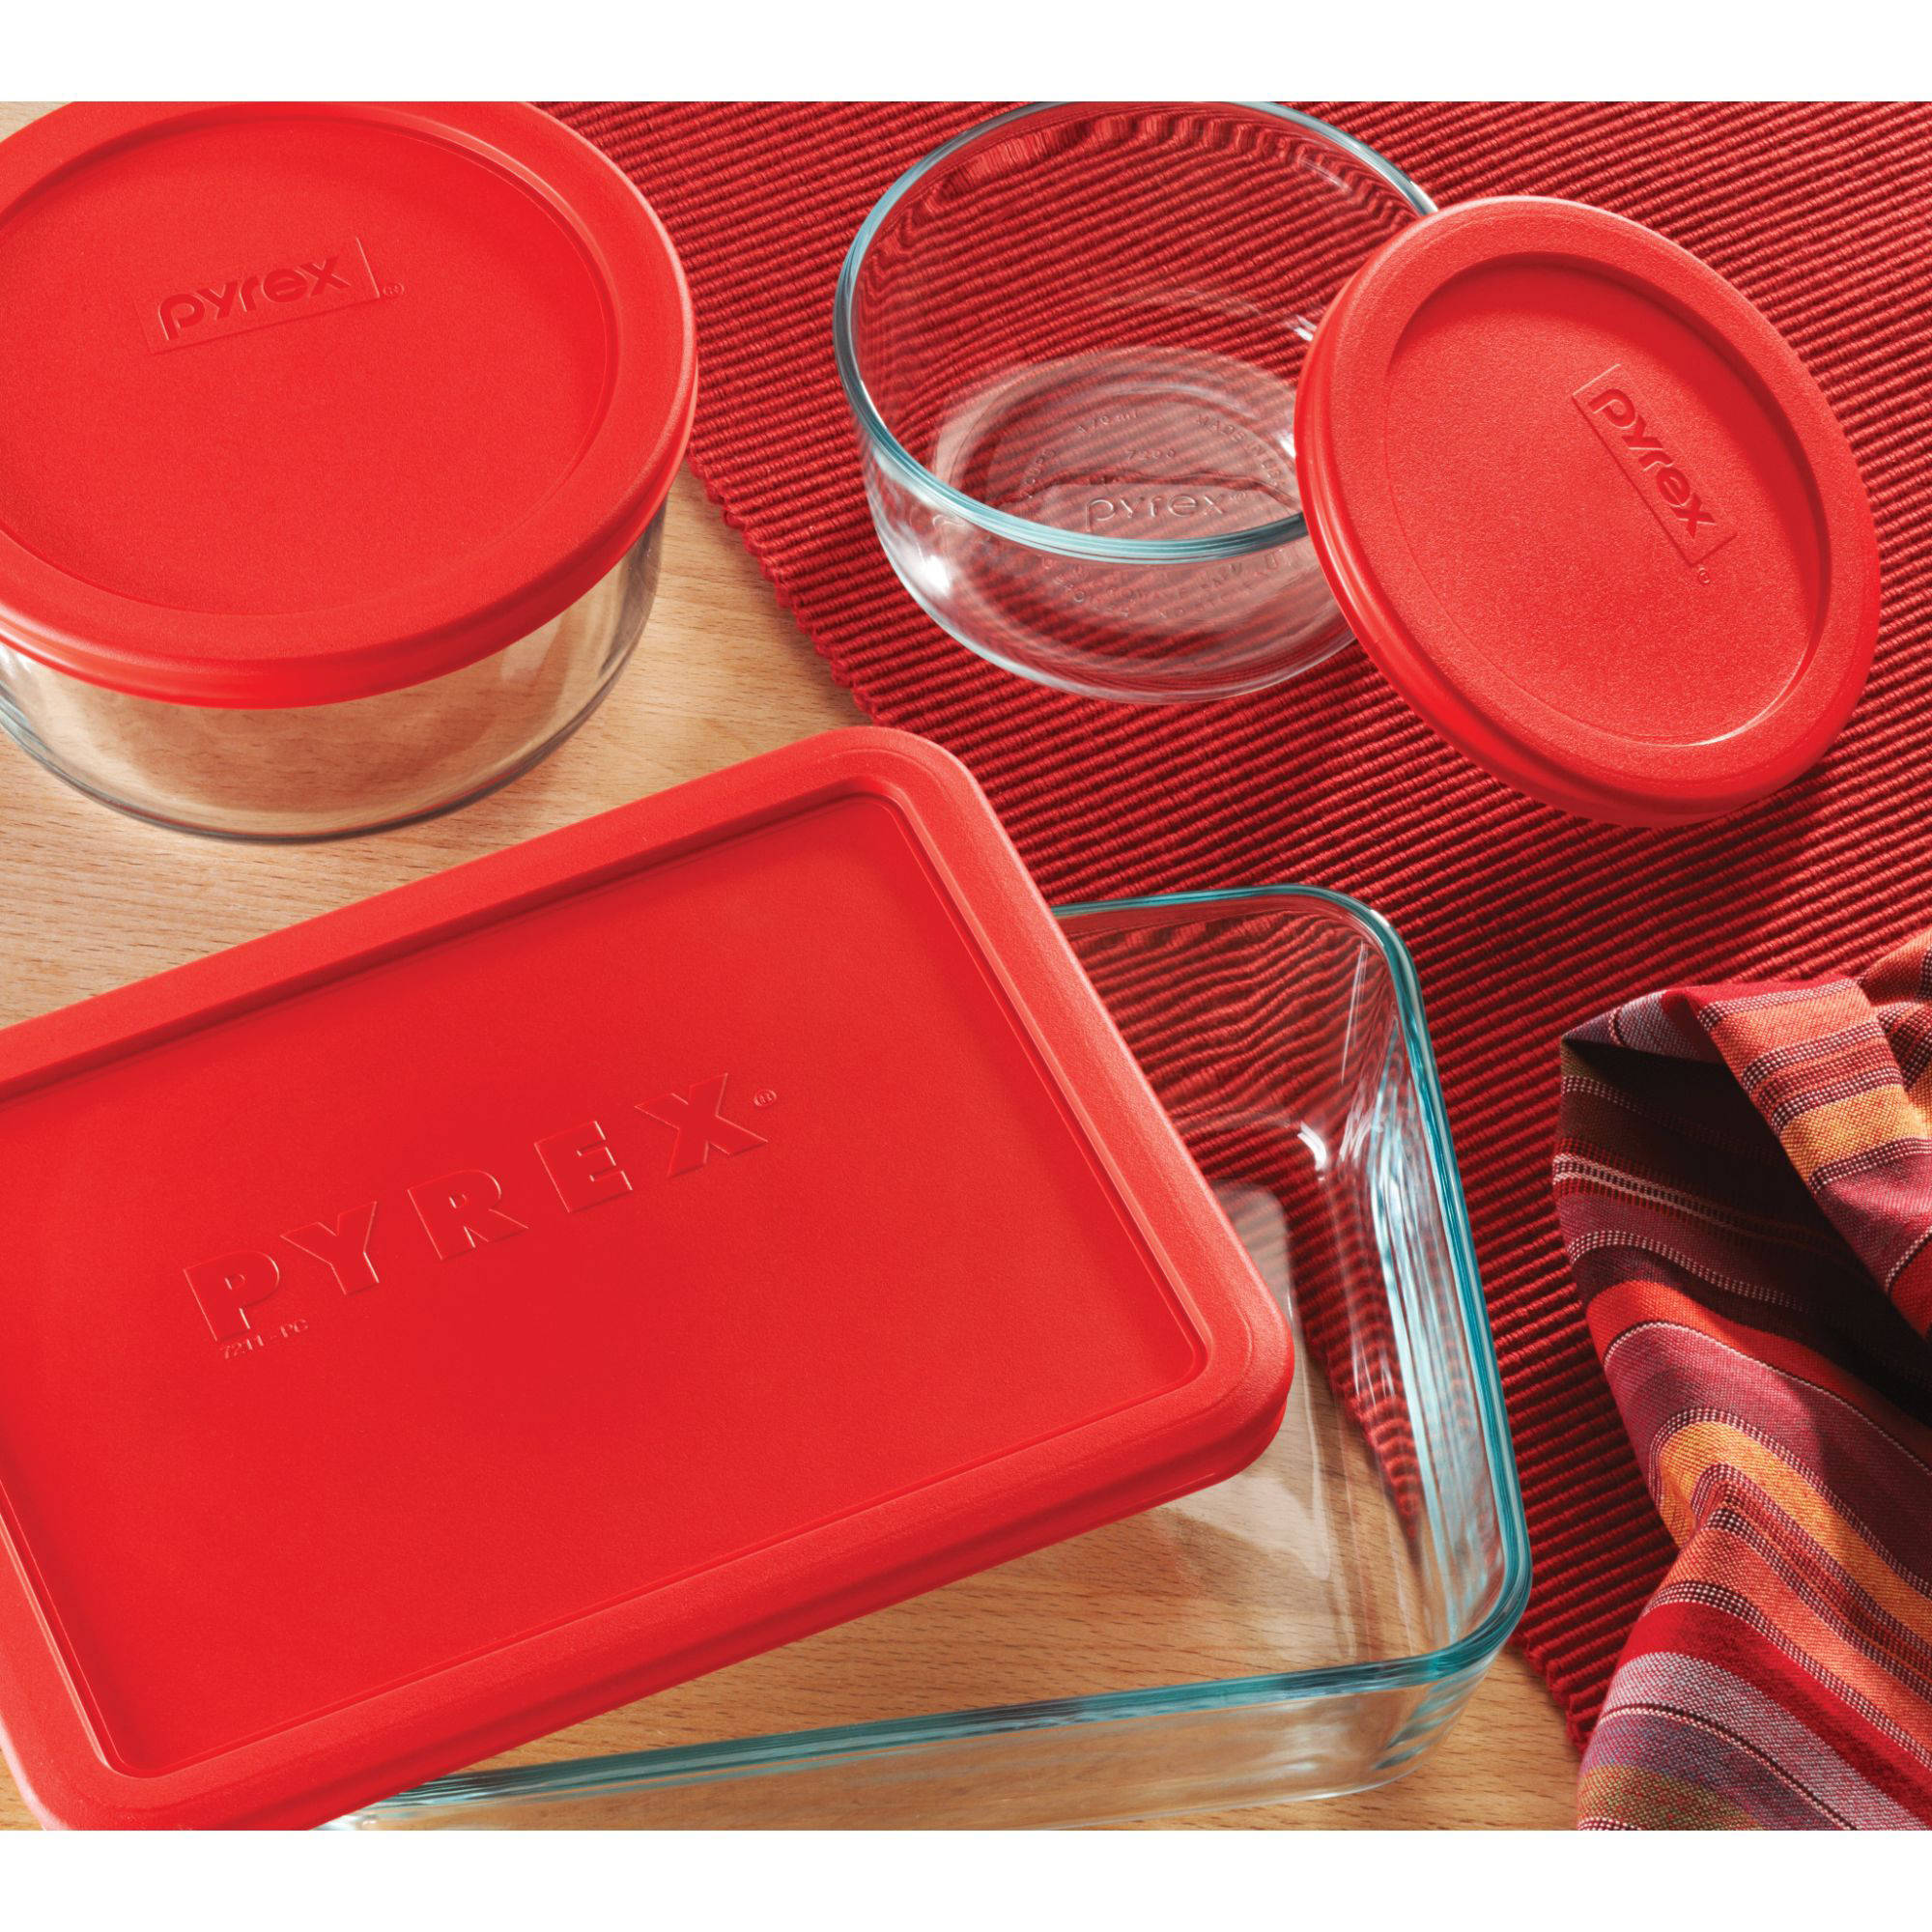 Pyrex® Storage Plus Glass Storage Container, Red, 14 Piece - image 6 of 11